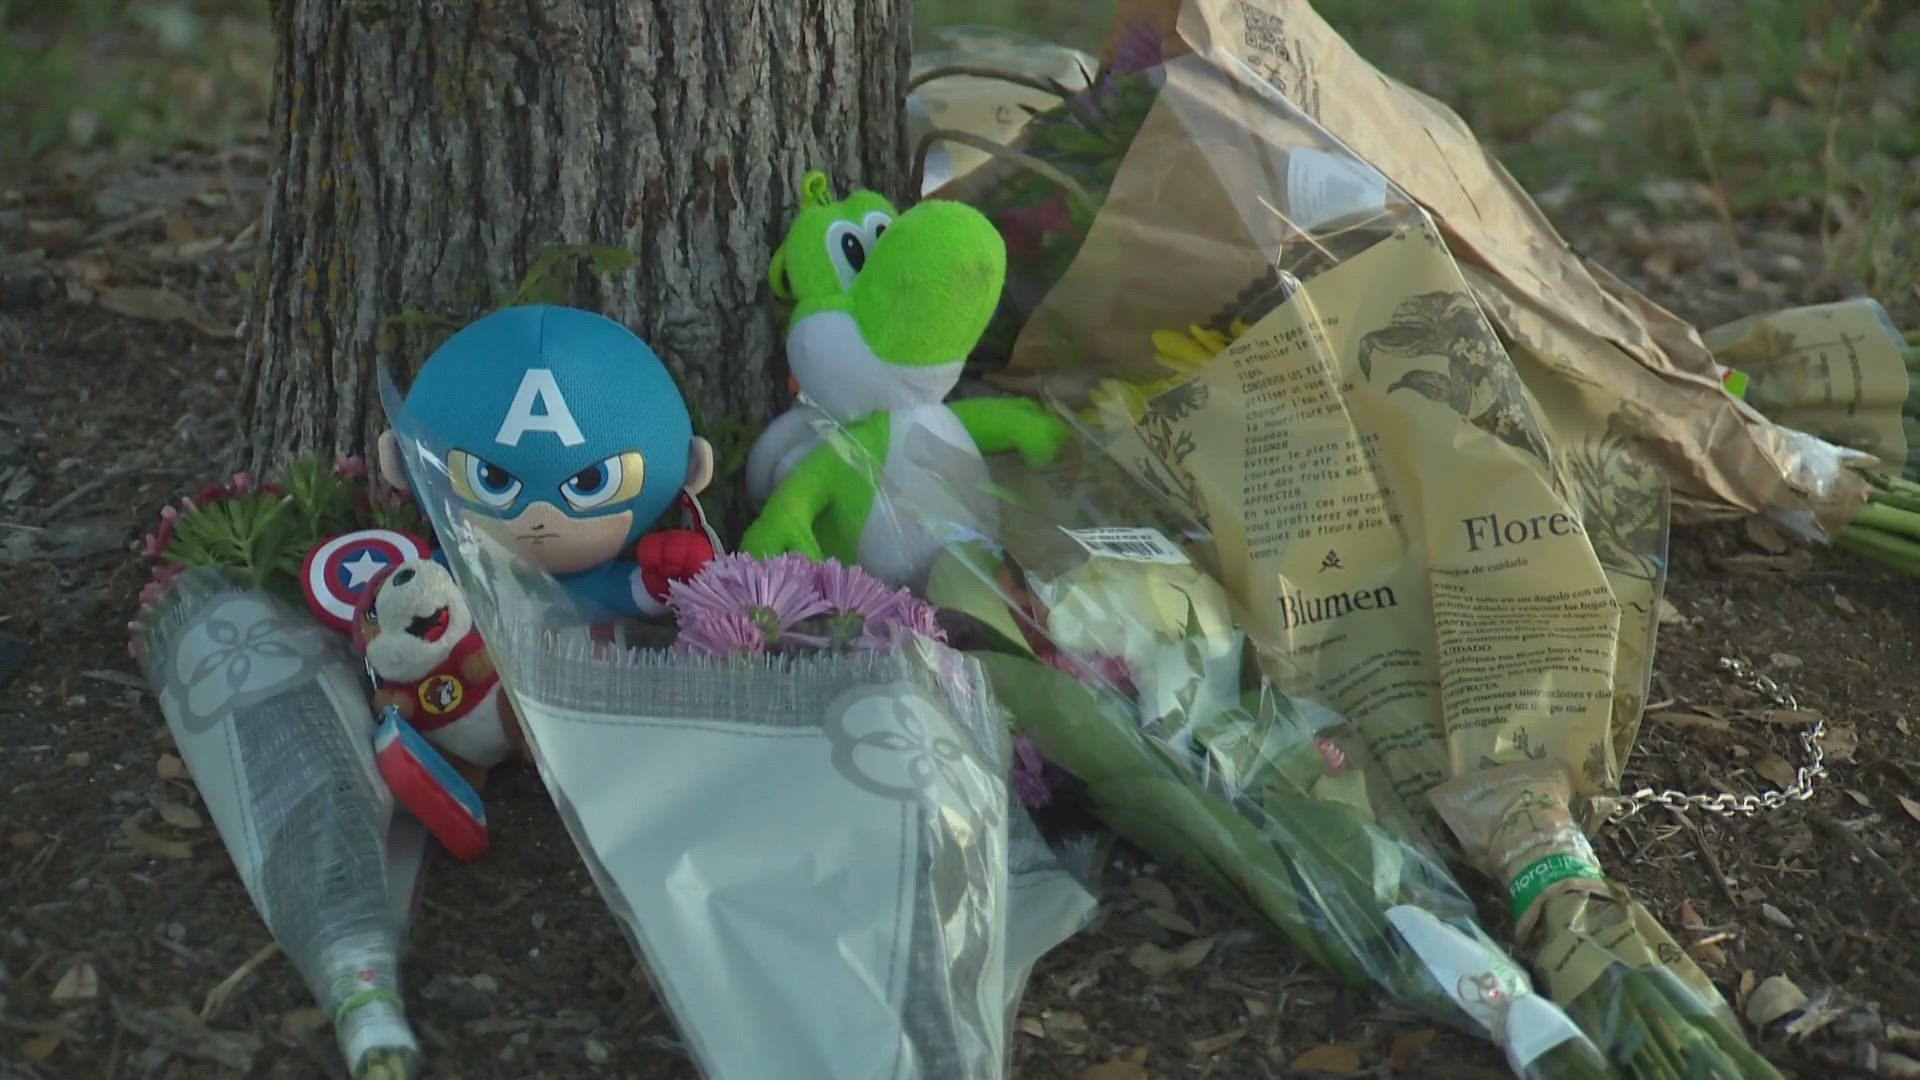 Memorial growing for mother and child killed after being hit by car